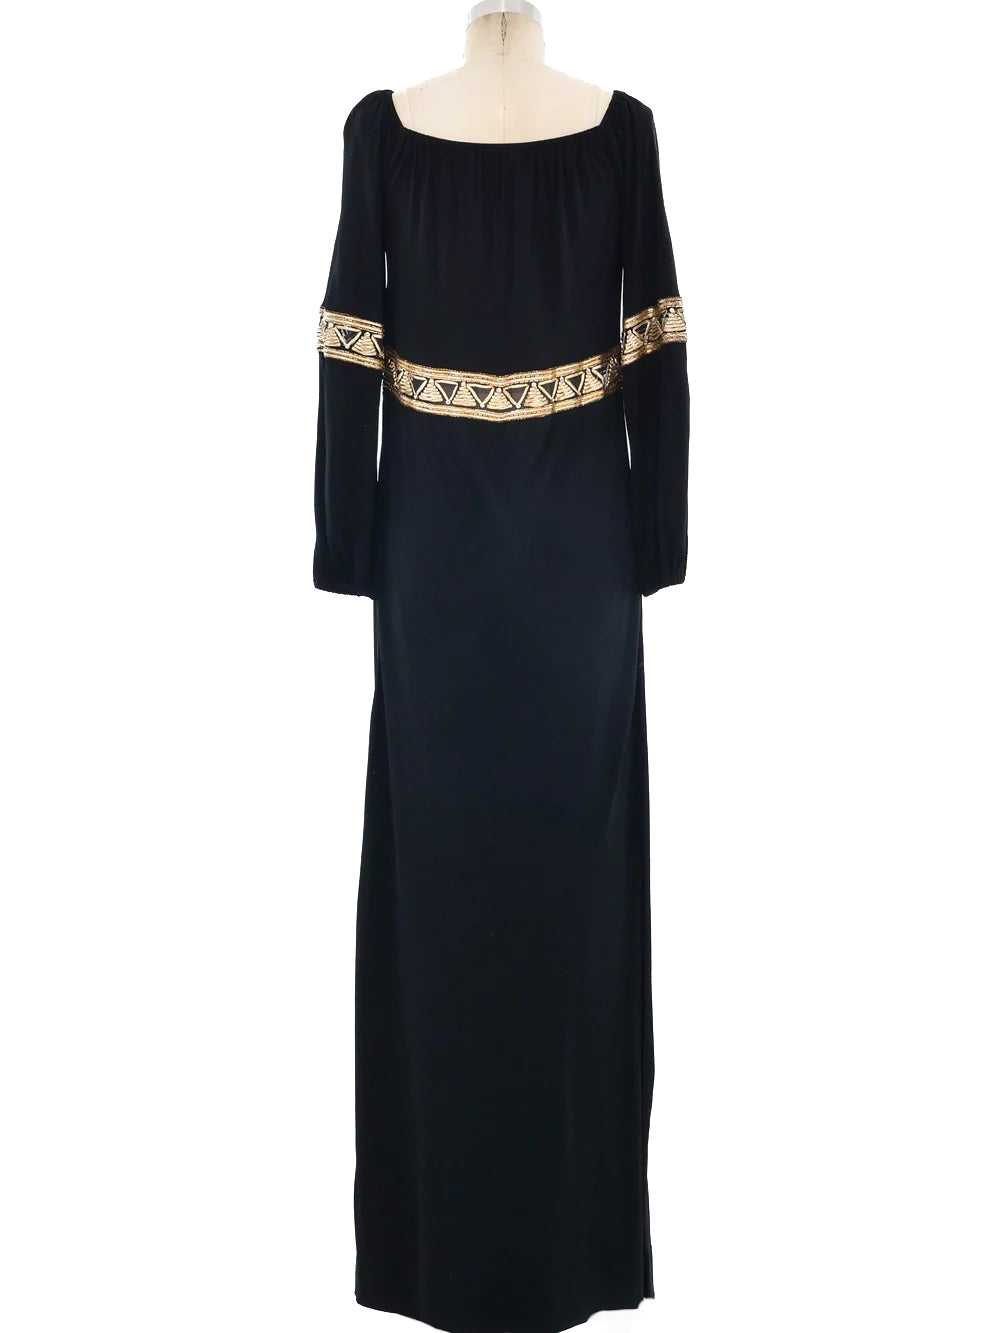 Givenchy Metallic Trimmed Jersey Goddess Gown - image 3